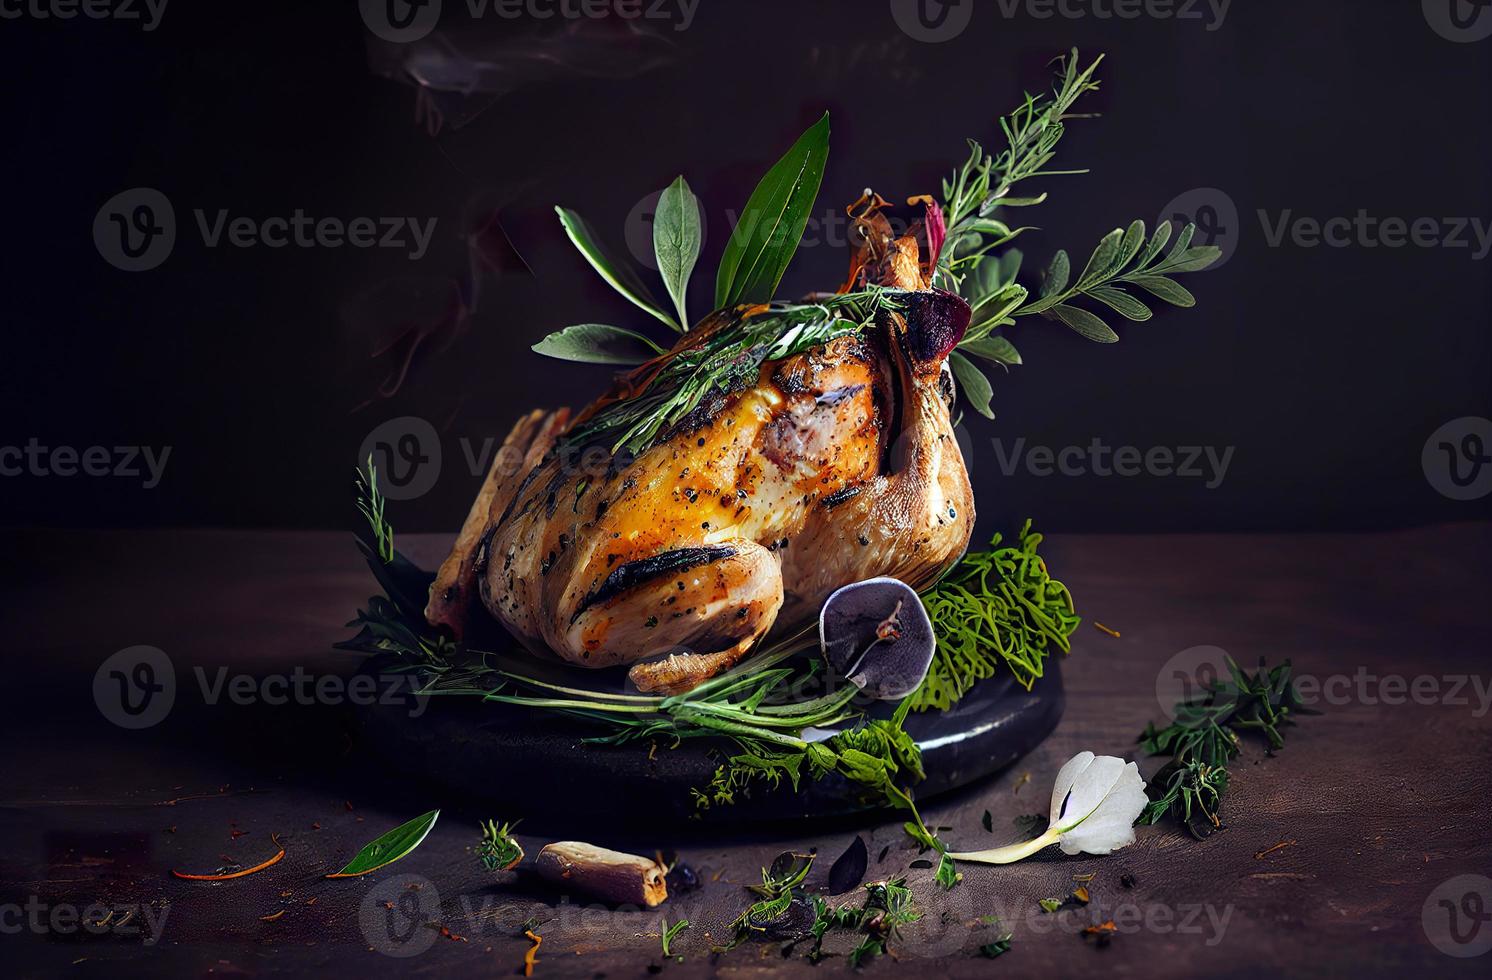 Boneless chicken with herbs on a black stone background. photo